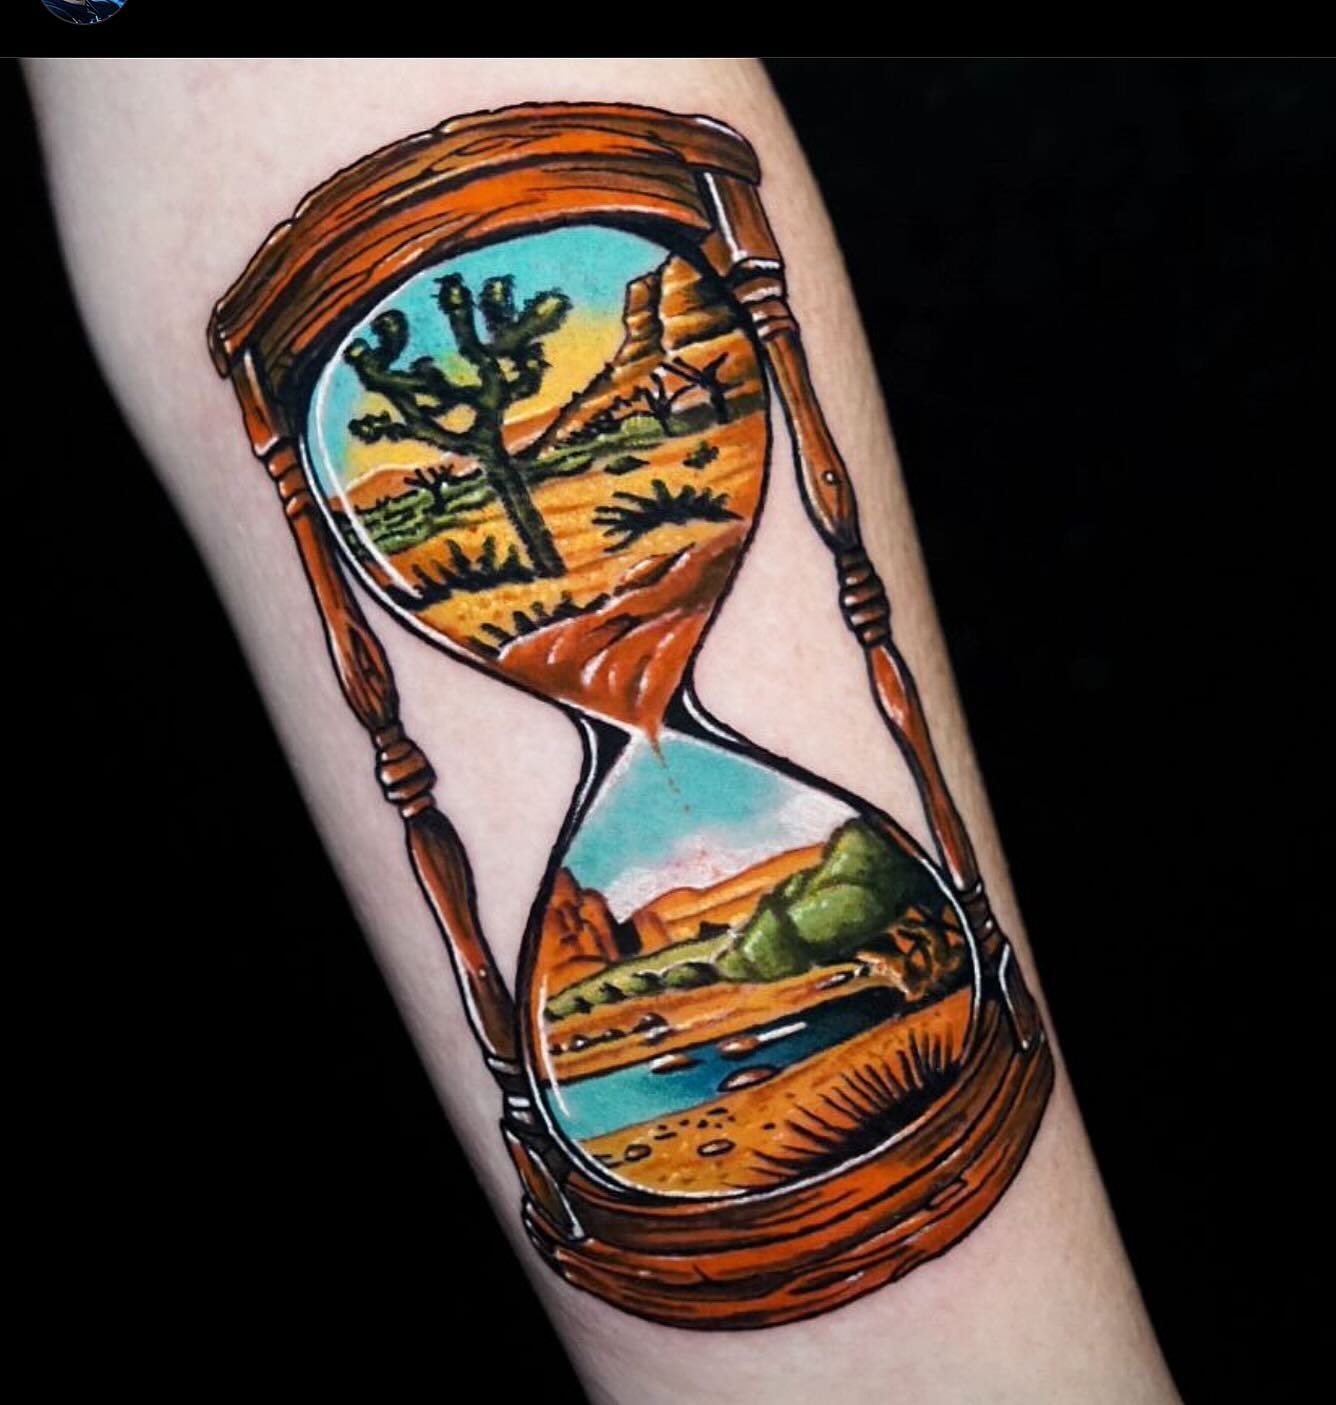 @egtattoo did an epic job on this hourglass with a high desert scenery all in color here at @adornmentbodyart in beautiful Palm Springs, California! If you are ever in the valley, please come check us out.
To book an appointment with  @egtattoo you c